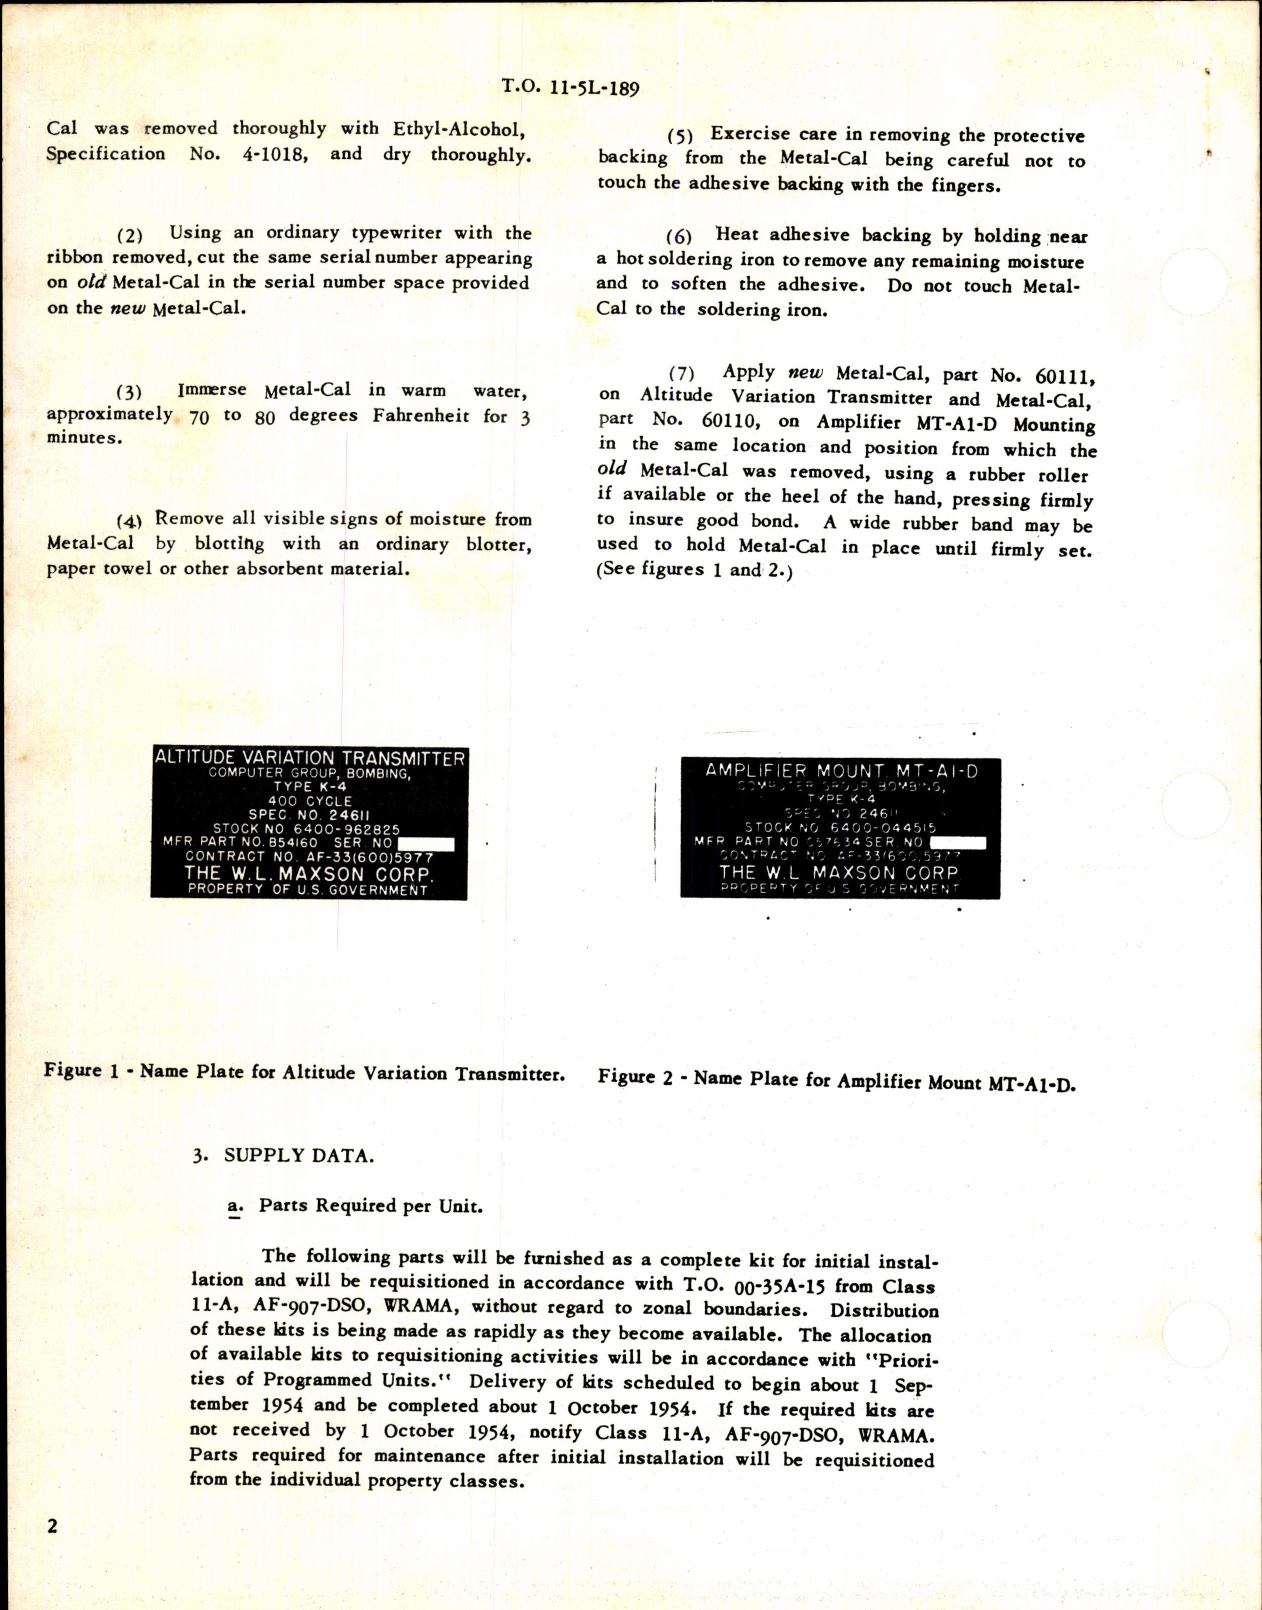 Sample page 2 from AirCorps Library document: Replacement of Name Plate on Altitude Transmitter